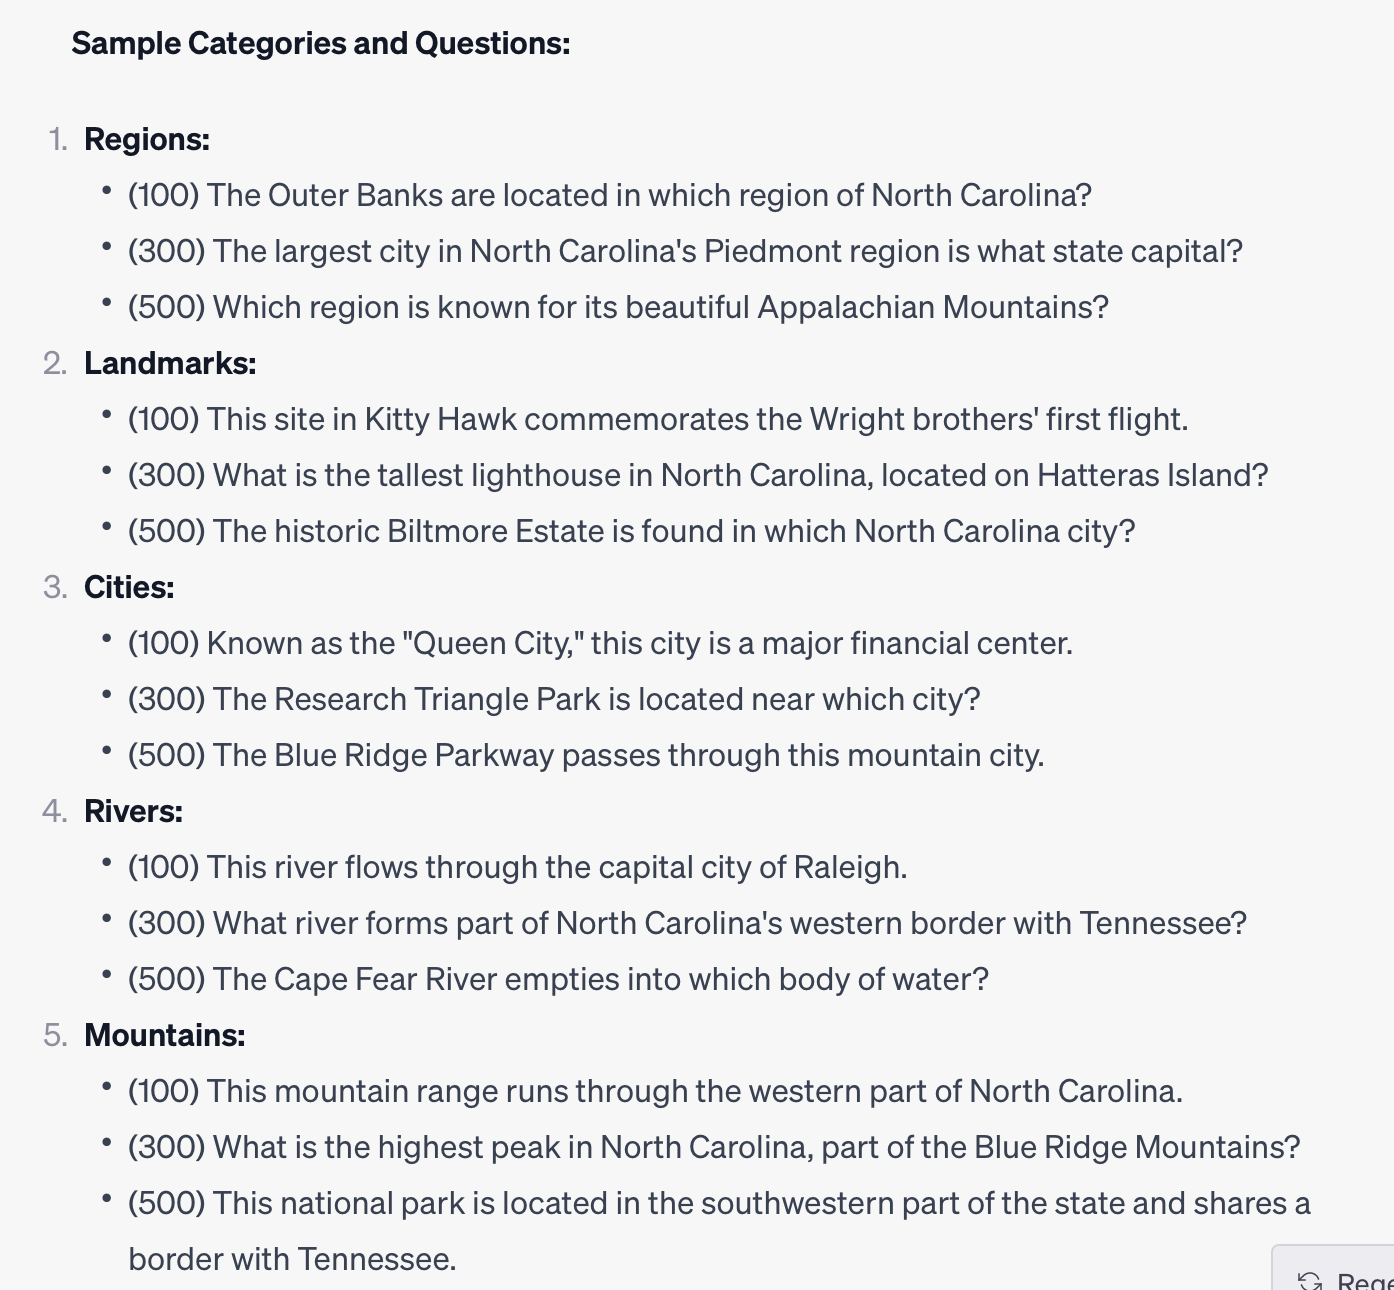 Jeopardy-style trivia game on NC geography created using ChatGPT